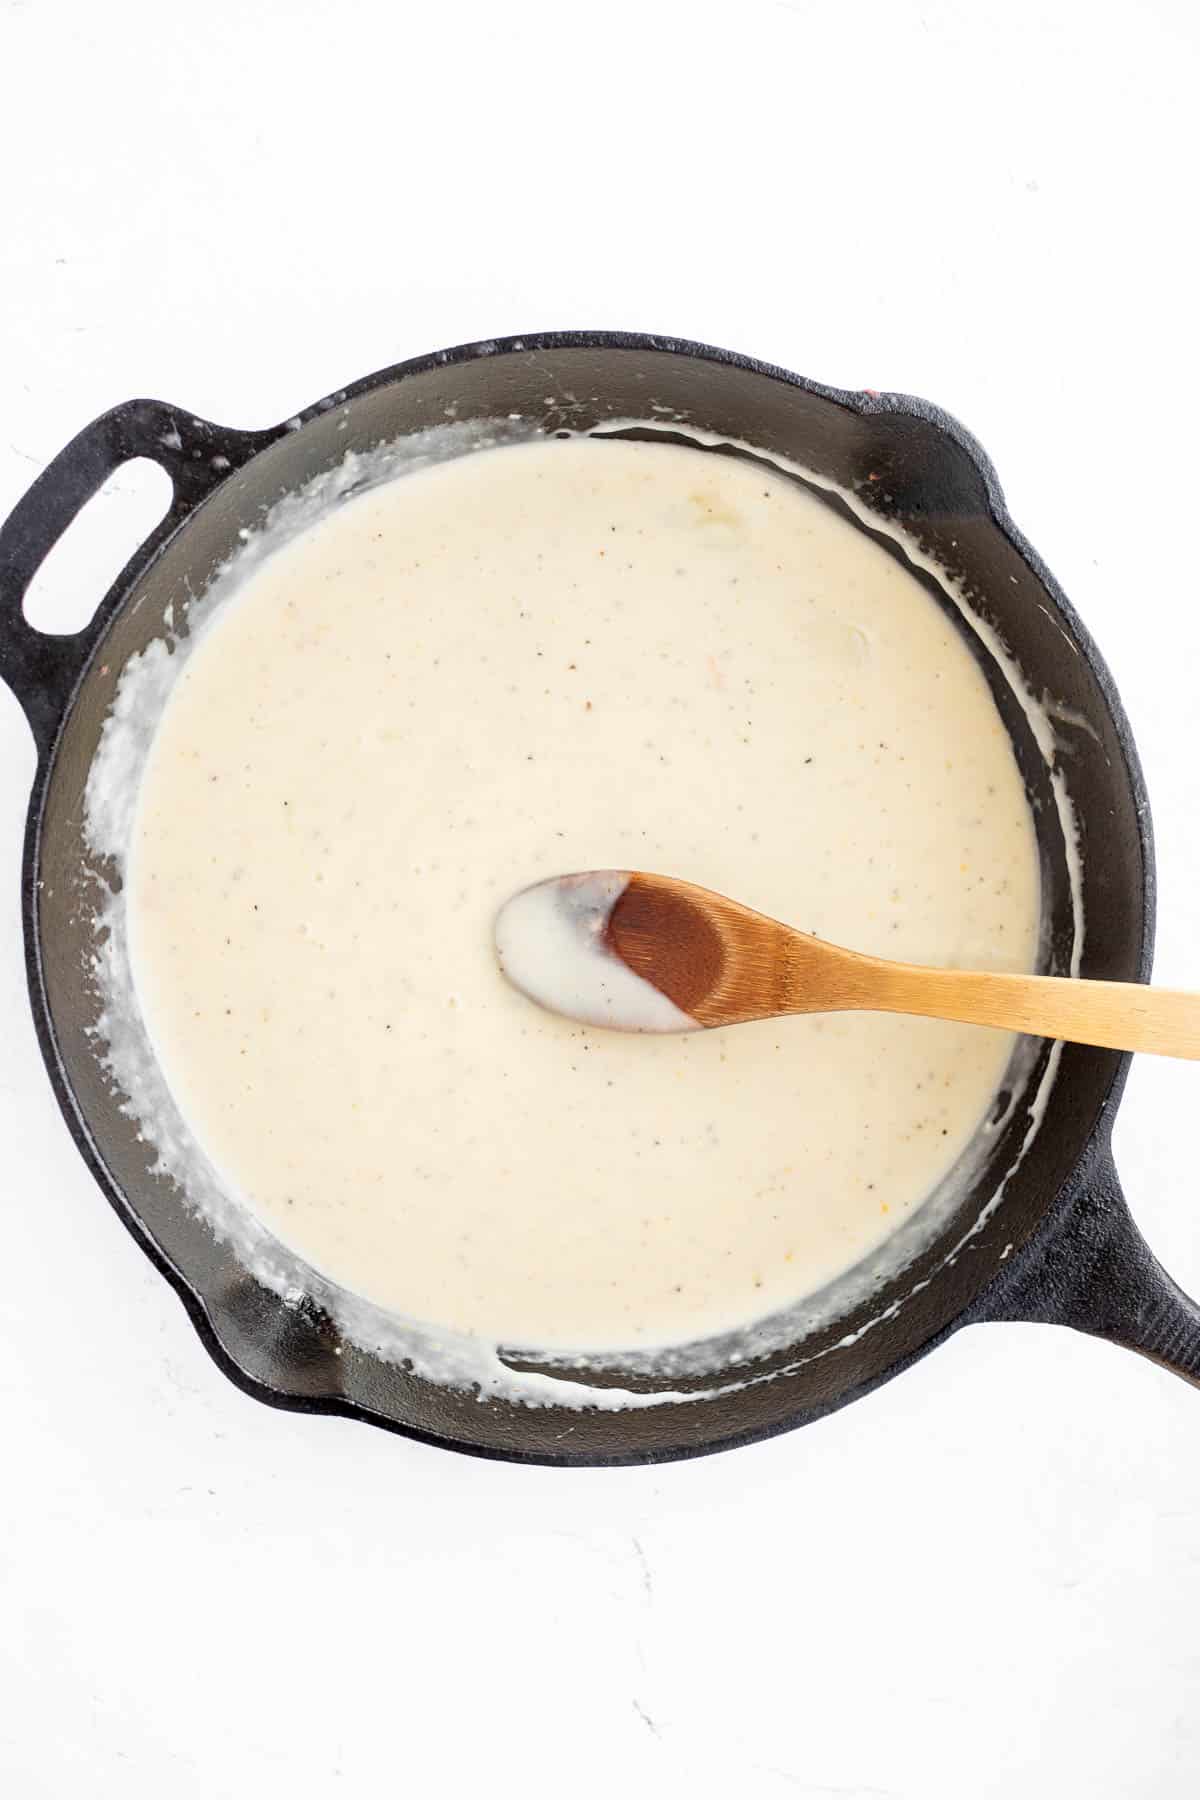 cheese sauce in cast iron pan with a wooden spoon.